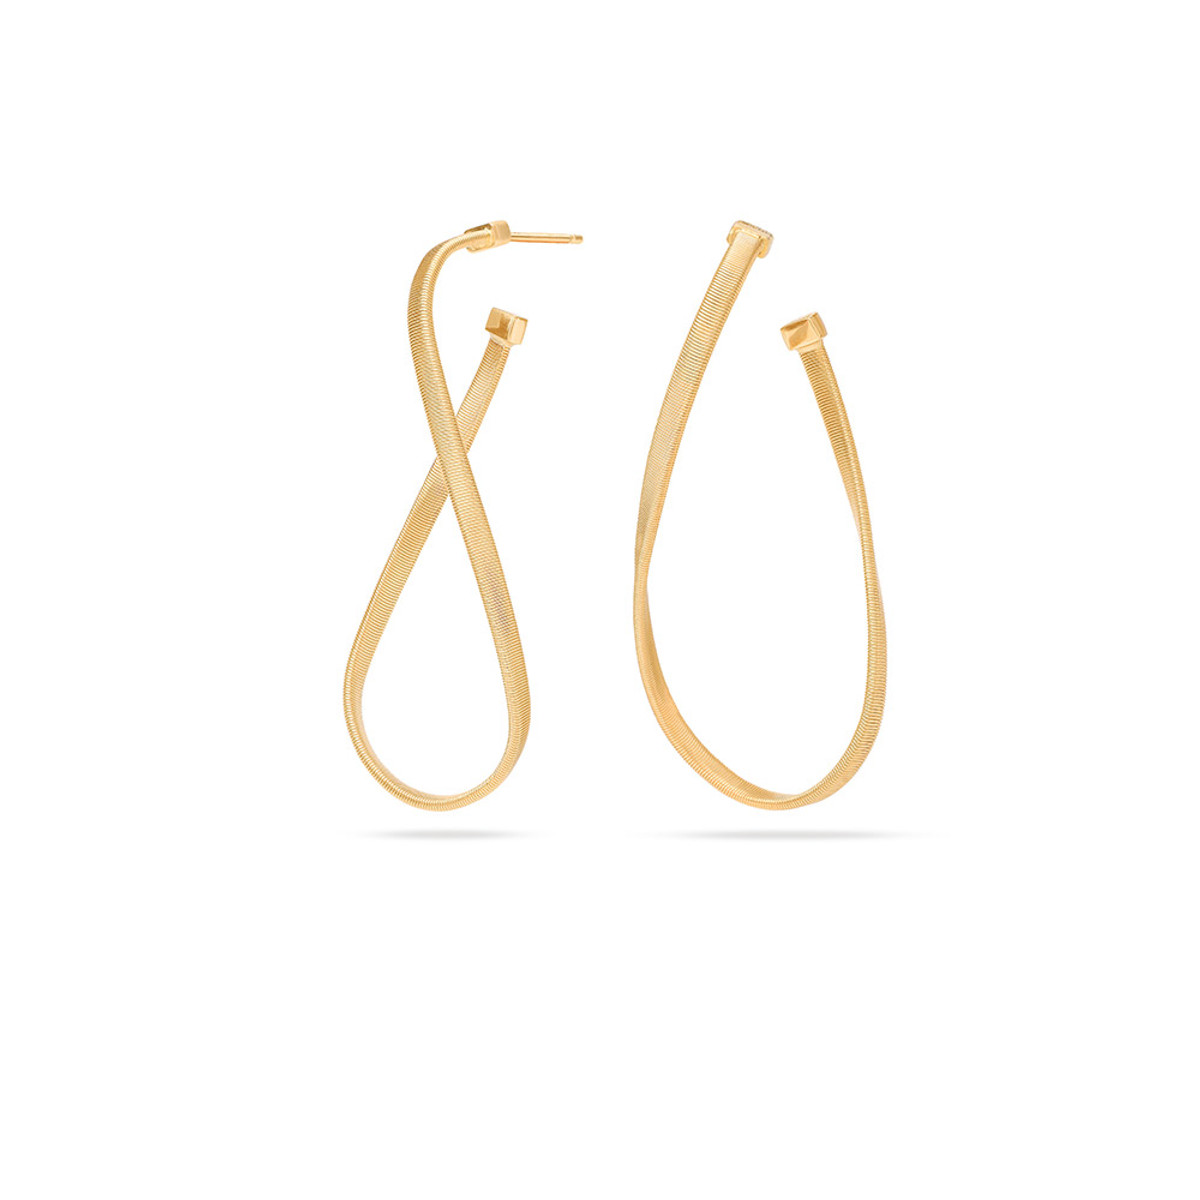 Marco Bicego Marrakech Collection 18K Yellow Gold Large Hand Twisted Earrings-54249 Product Image